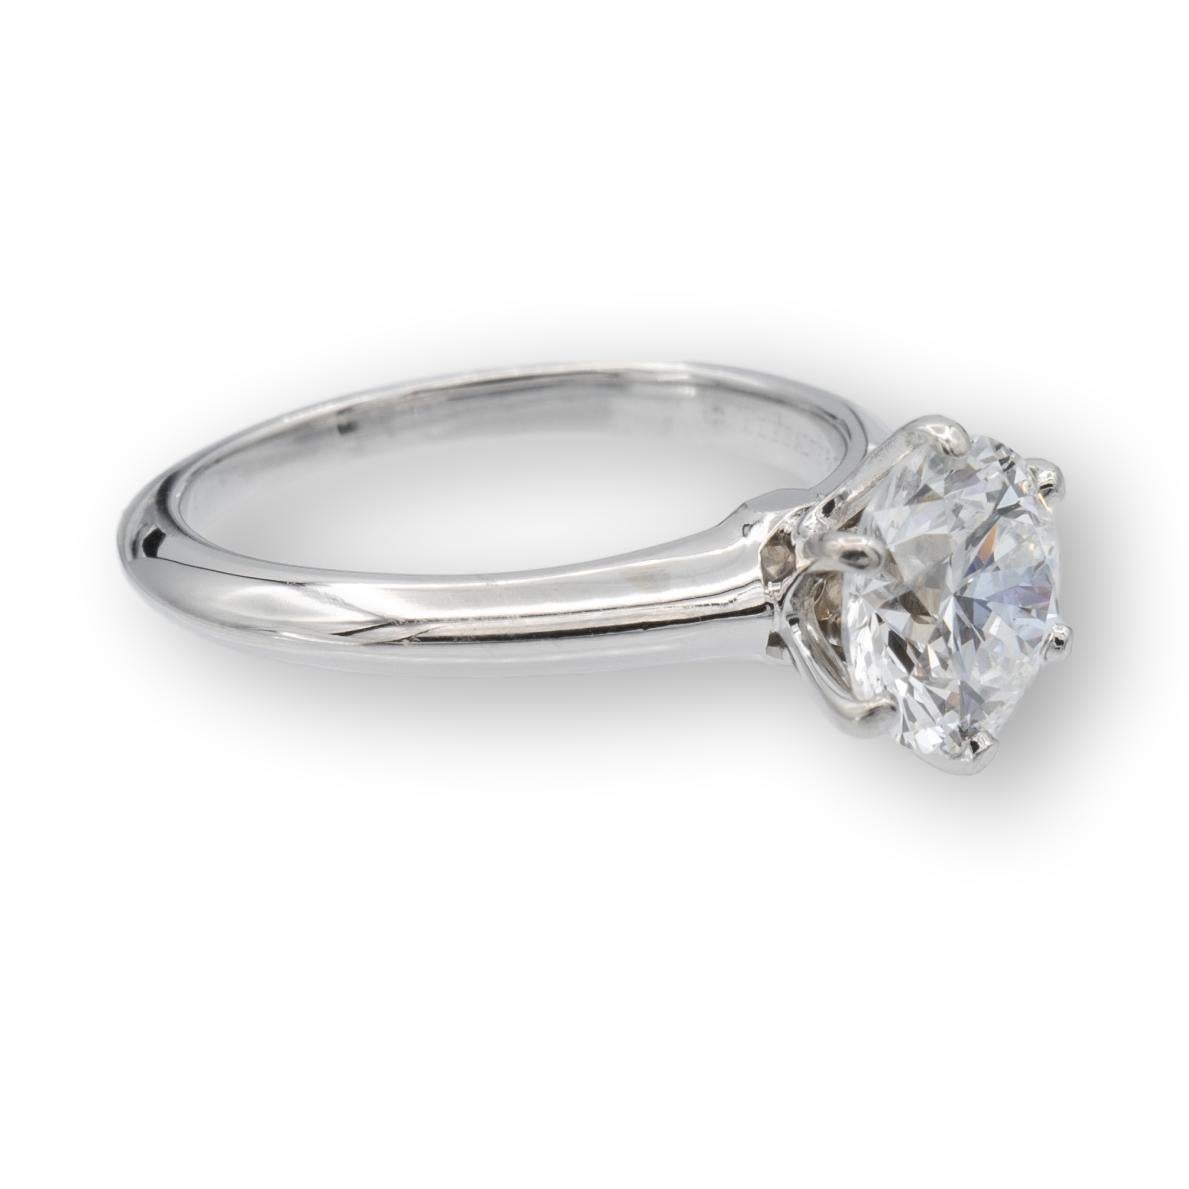 Tiffany and Co. engagement ring finely crafted in platinum featuring a round brilliant 1.70 ct diamond in a D color , SI1 clarity. The ring is accompanied by a certificate, appraisal and receipt from Tiffany. Ring is fully hallmarked with Tiffany